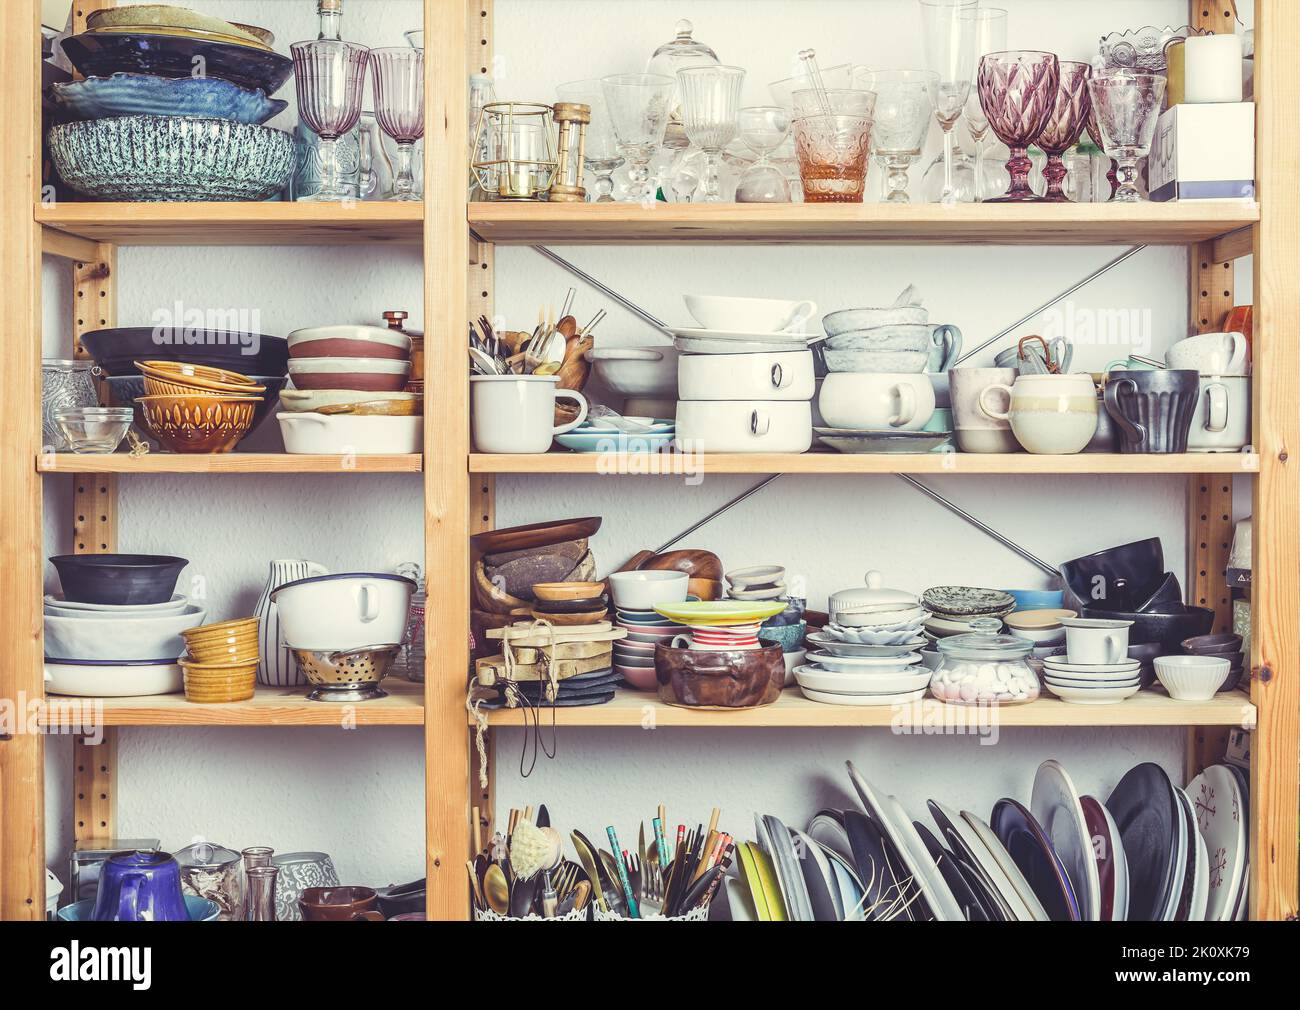 Shelves with kitchen clutter, utensils and kitchenware. Concept of tidying and decluttering Stock Photo